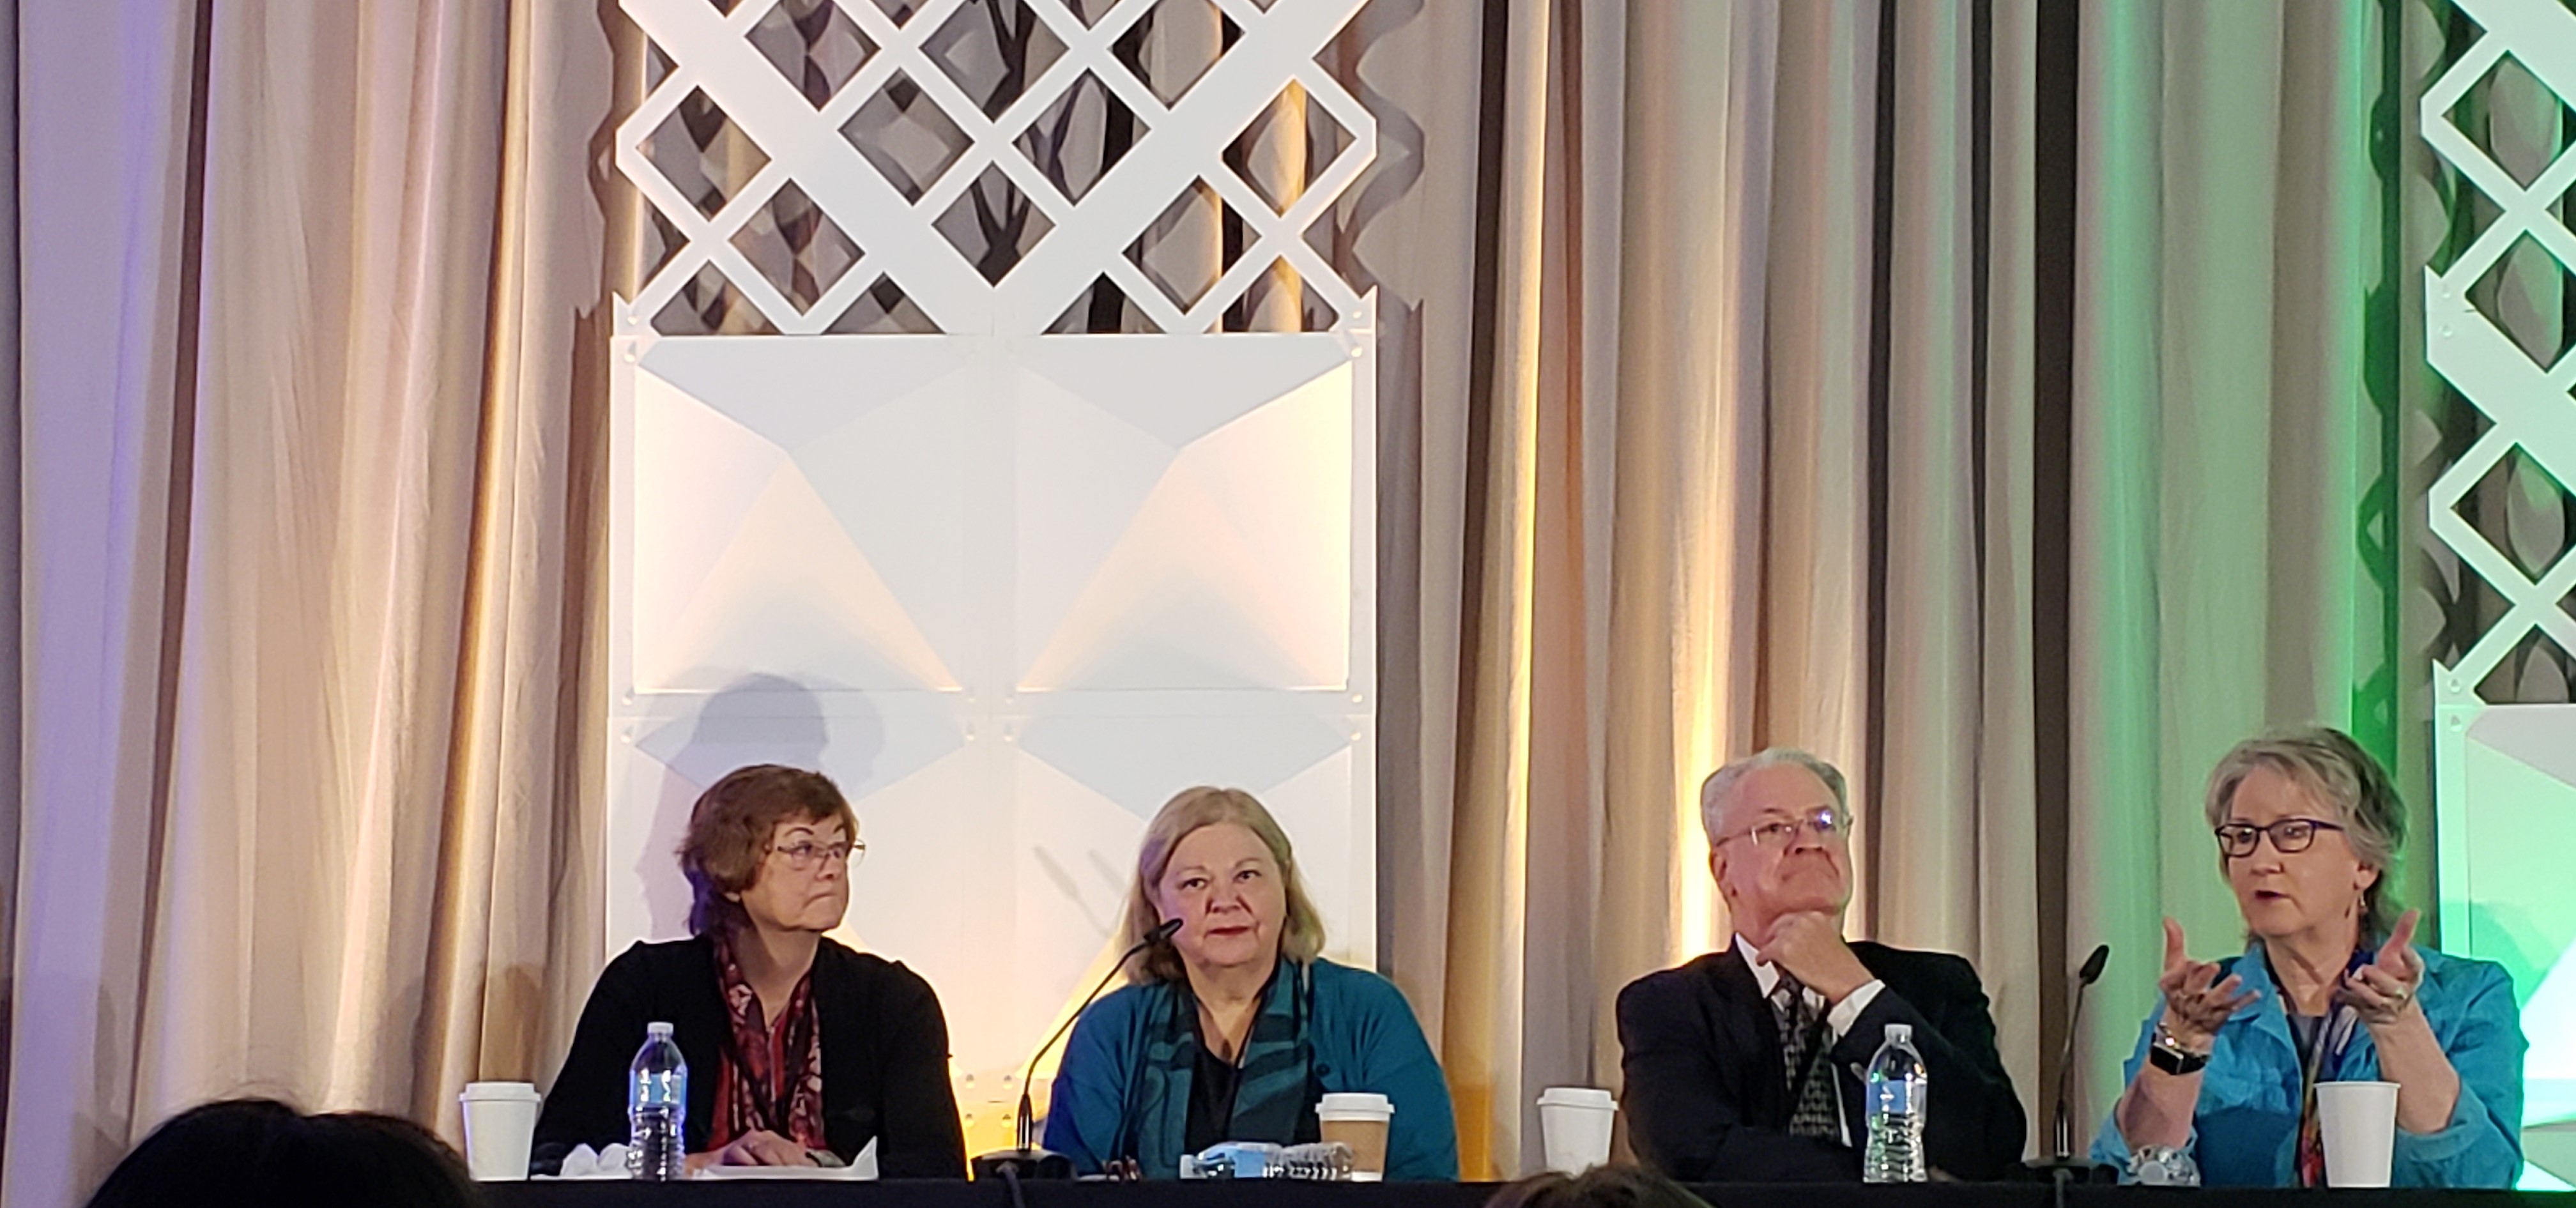 Panel of speakers at annual meeting. 30 Years Back, 30 Years Forward panel with Linda Baer, Ellen Wagner, Donald Norris, and Sally Johnstone